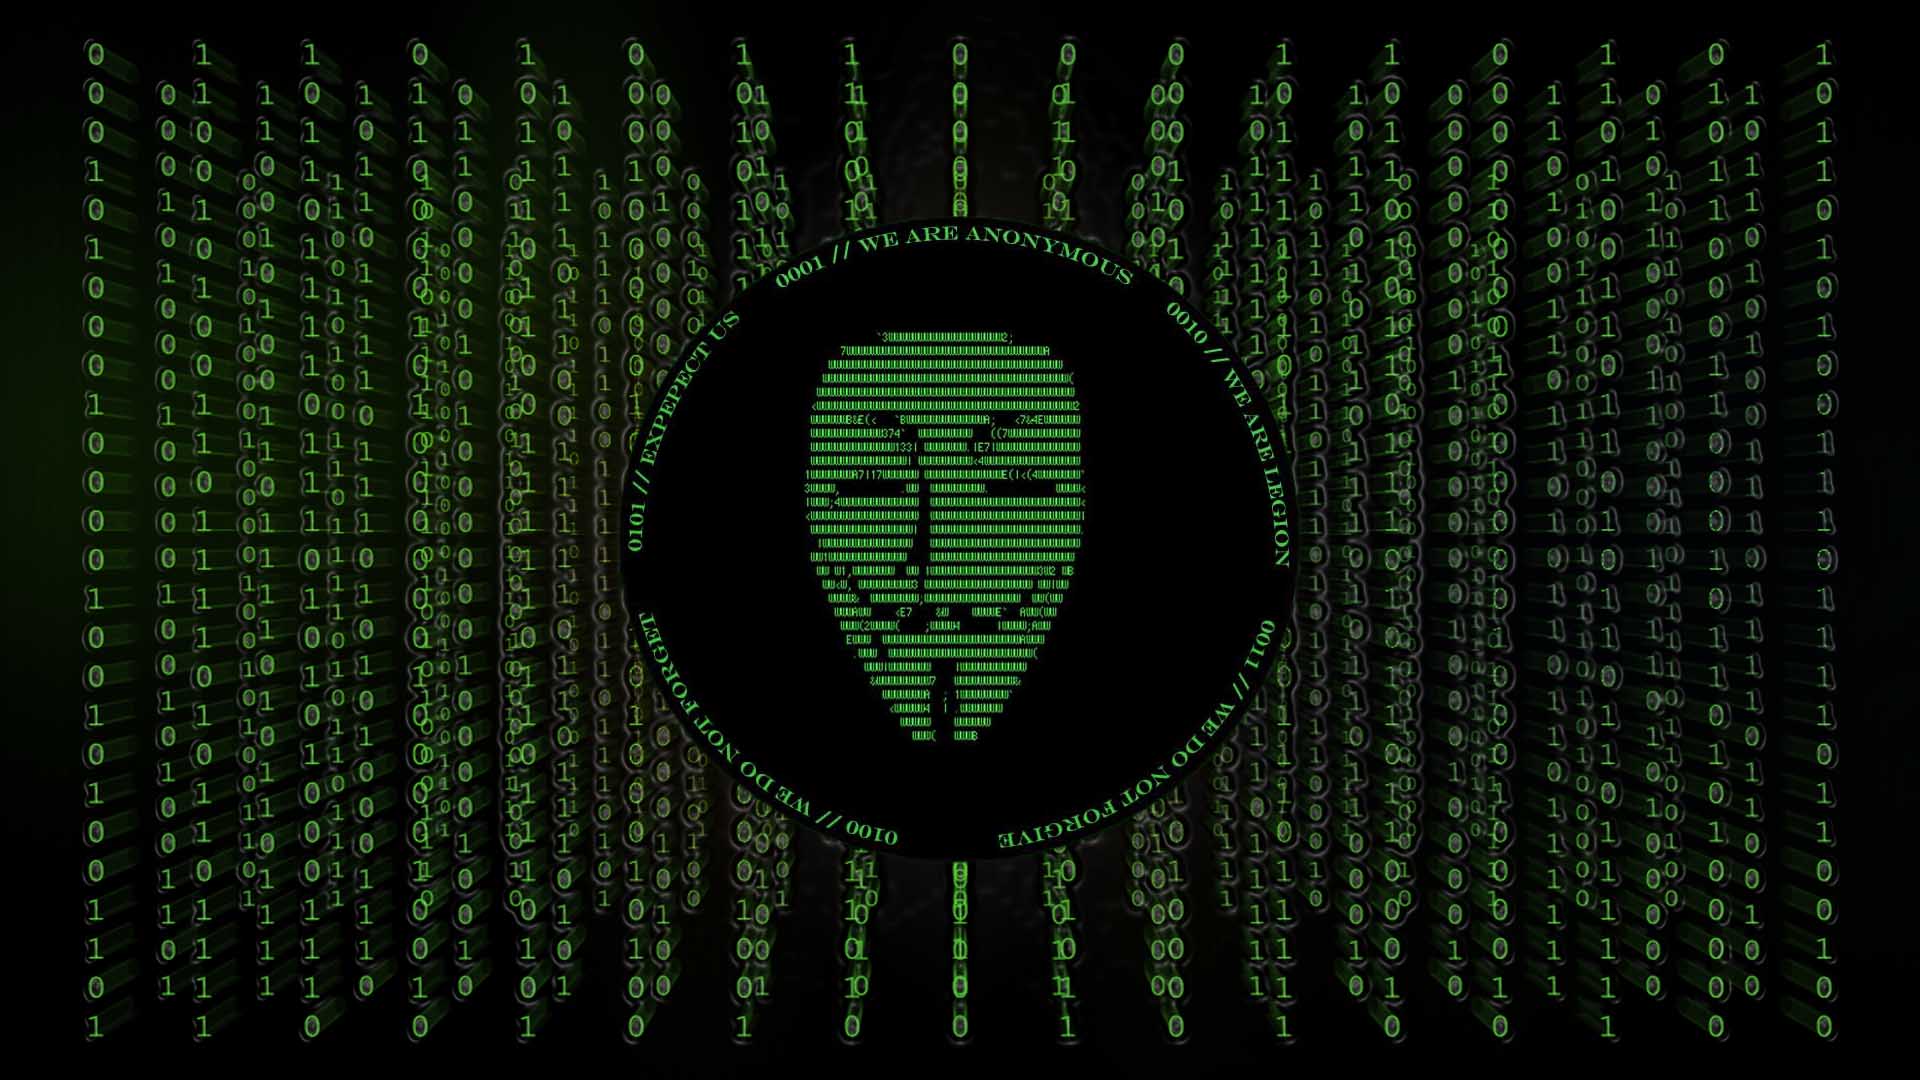 A Very Cool Set Of HD Wallpaper With The Anonymous Hackers